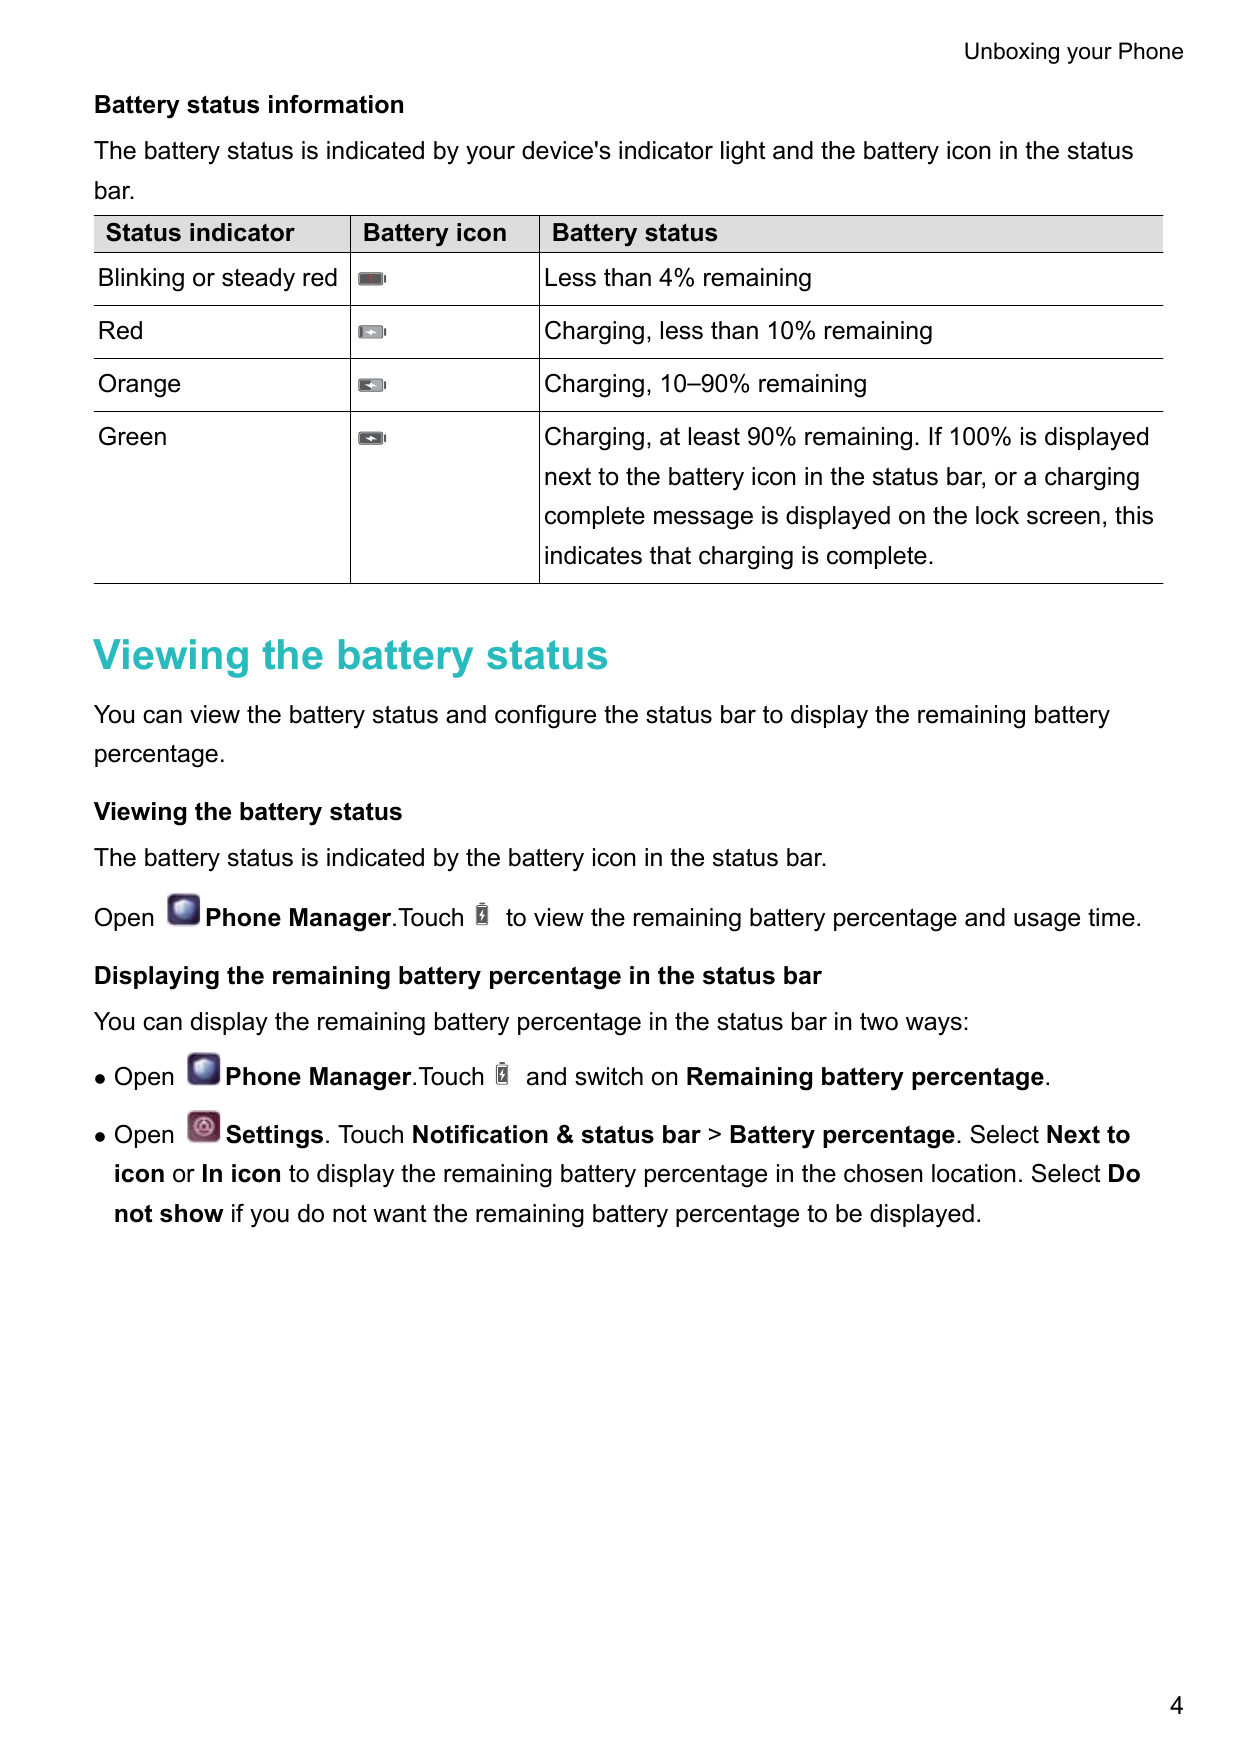 Unboxing your PhoneBattery status informationThe battery status is indicated by your device's indicator light and the battery ic